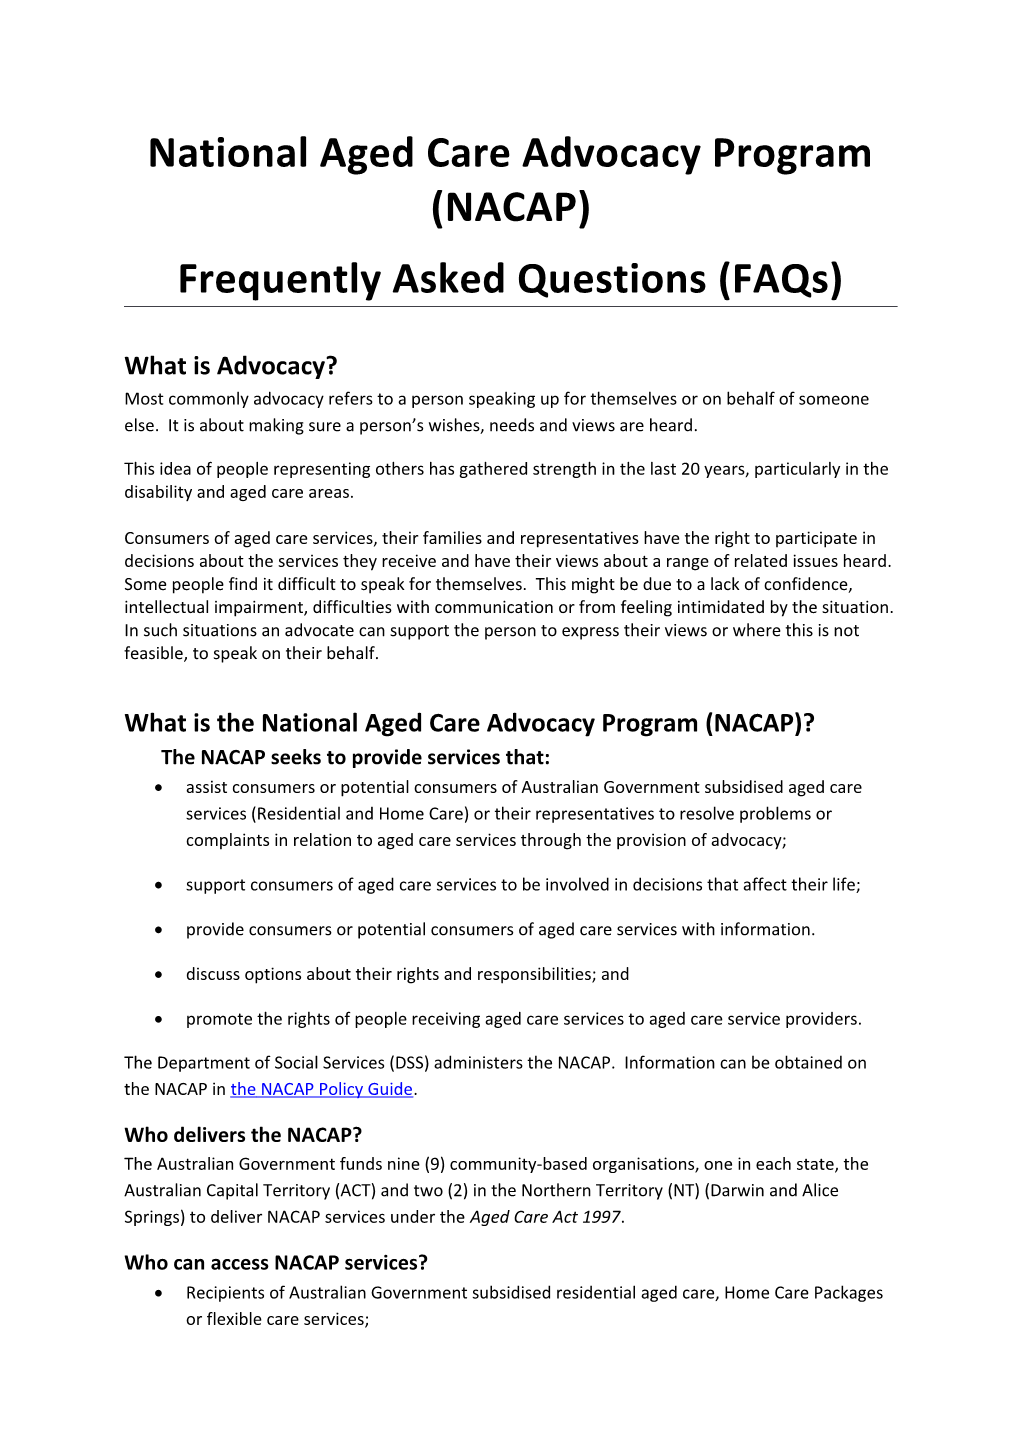 National Aged Care Advocacy Program (NACAP) Frequently Asked Questions (Faqs)